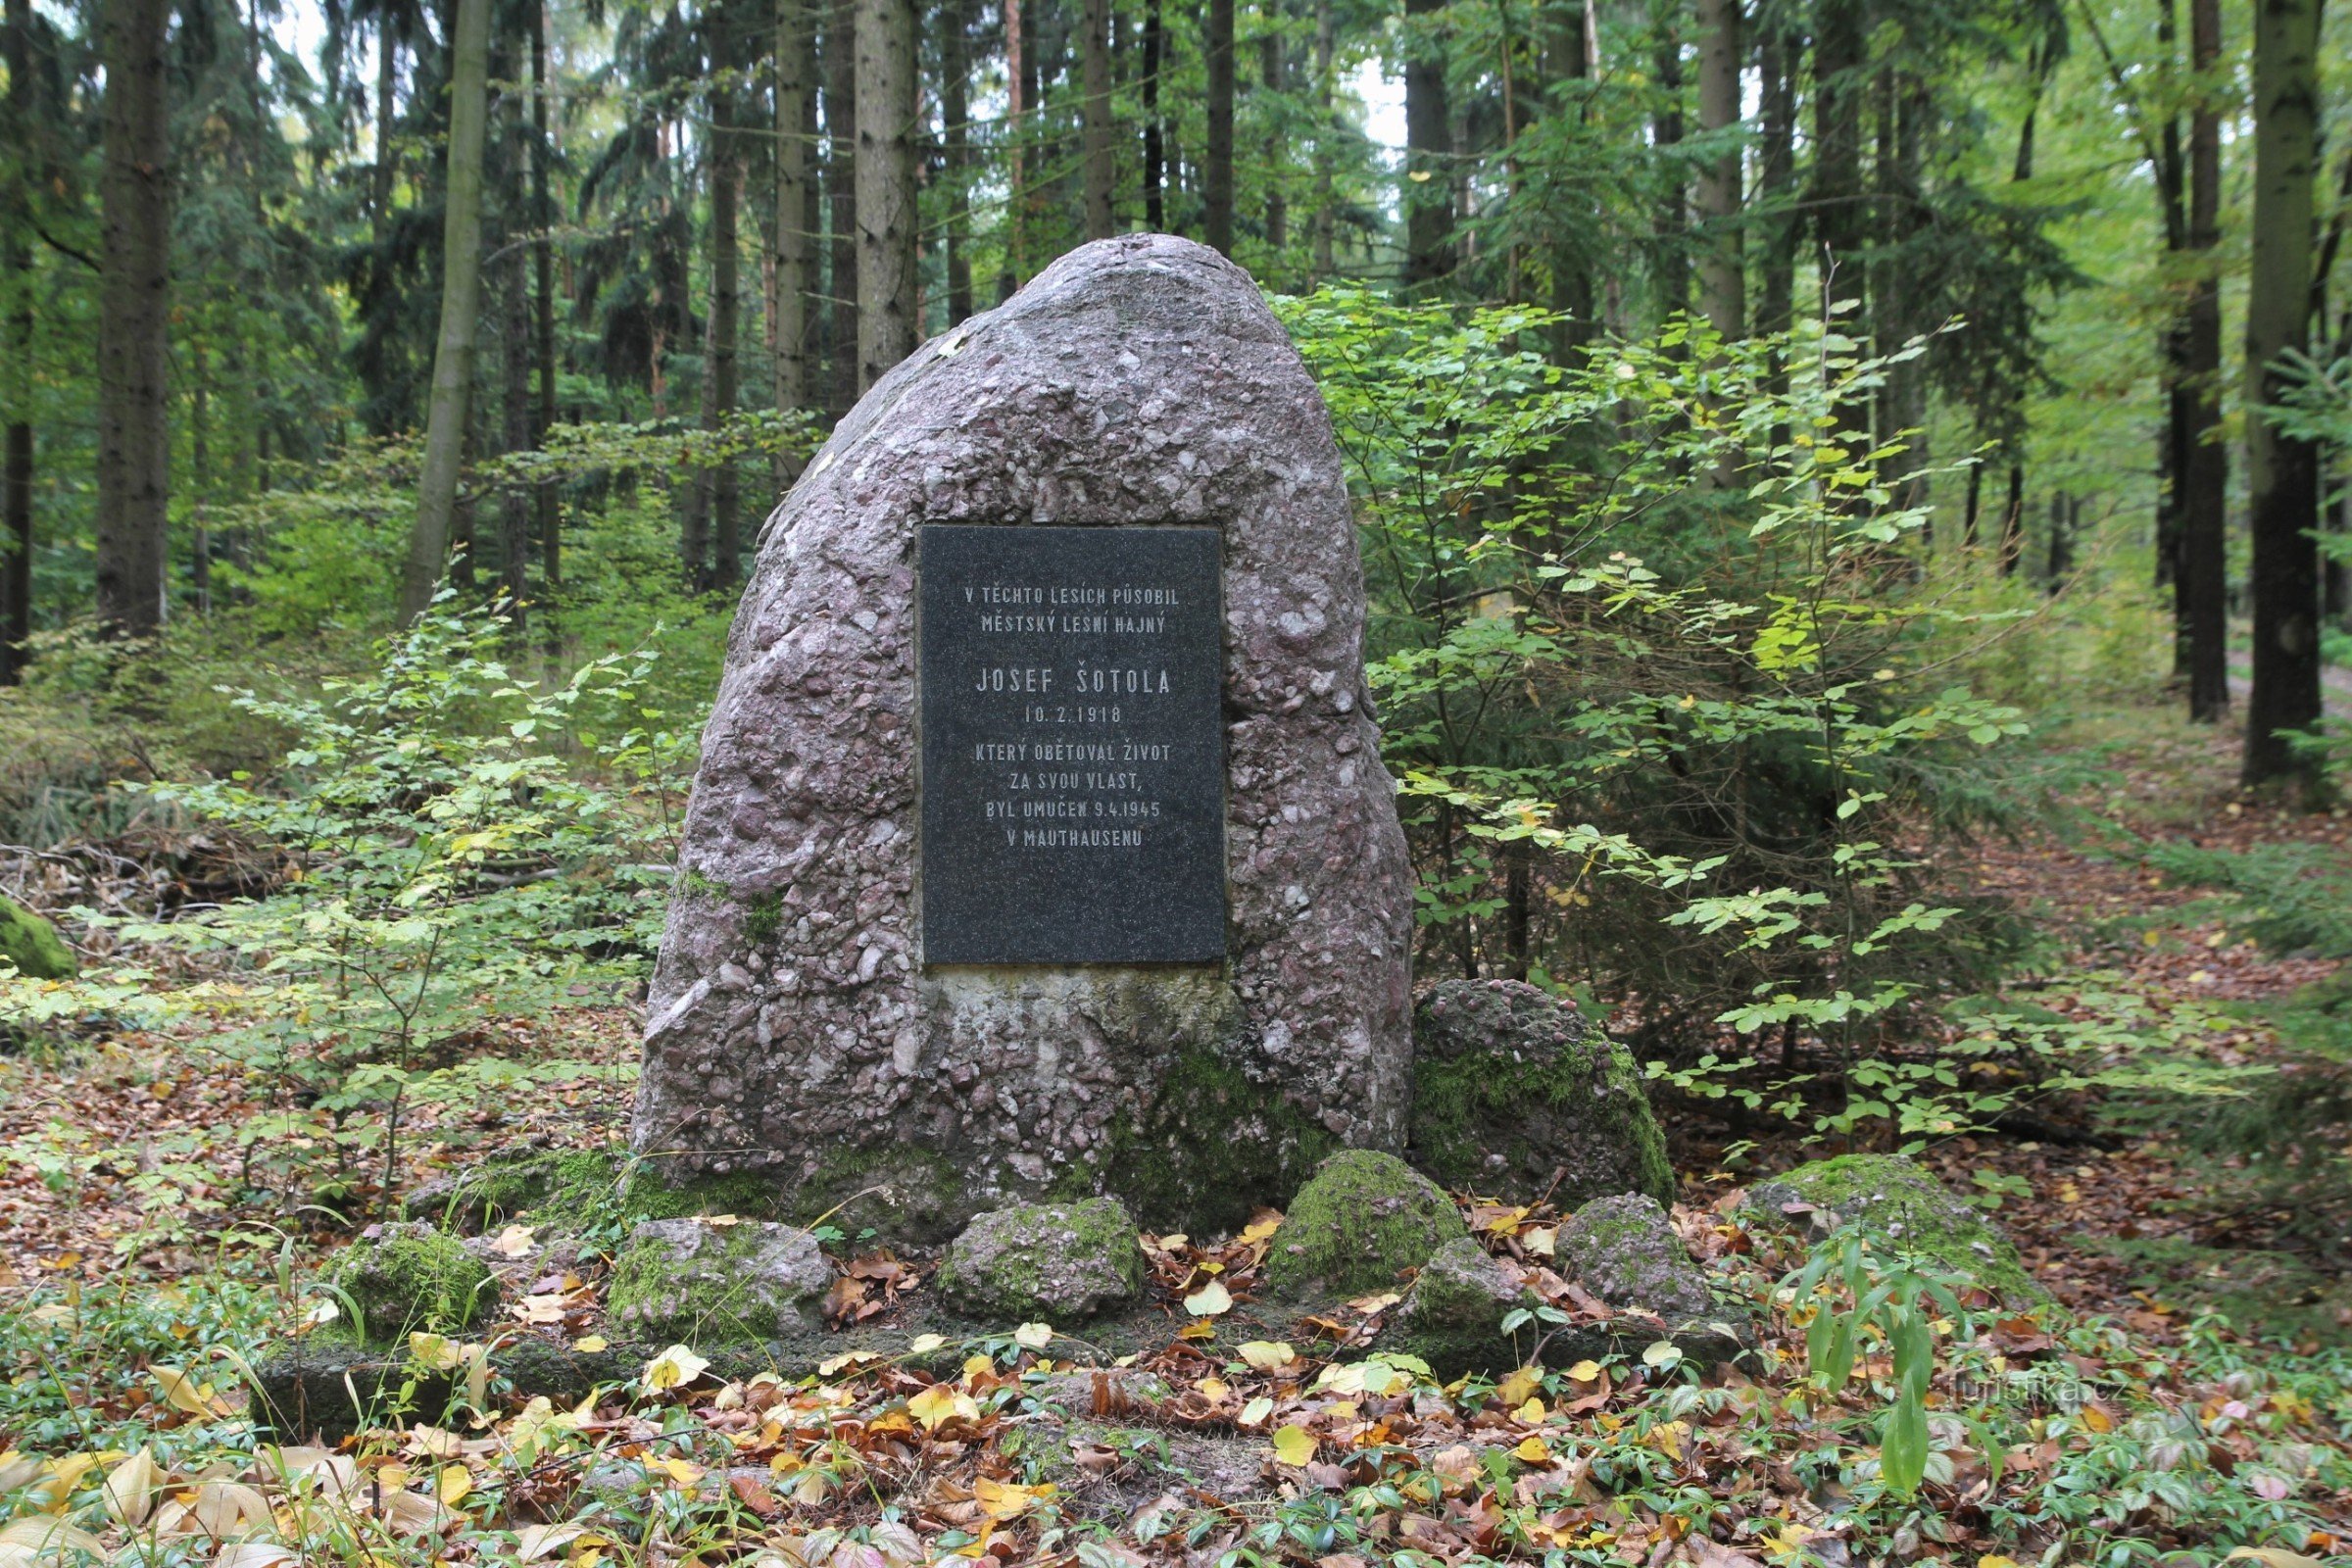 The memorial to Josef Šotola is located on a small forest clearing